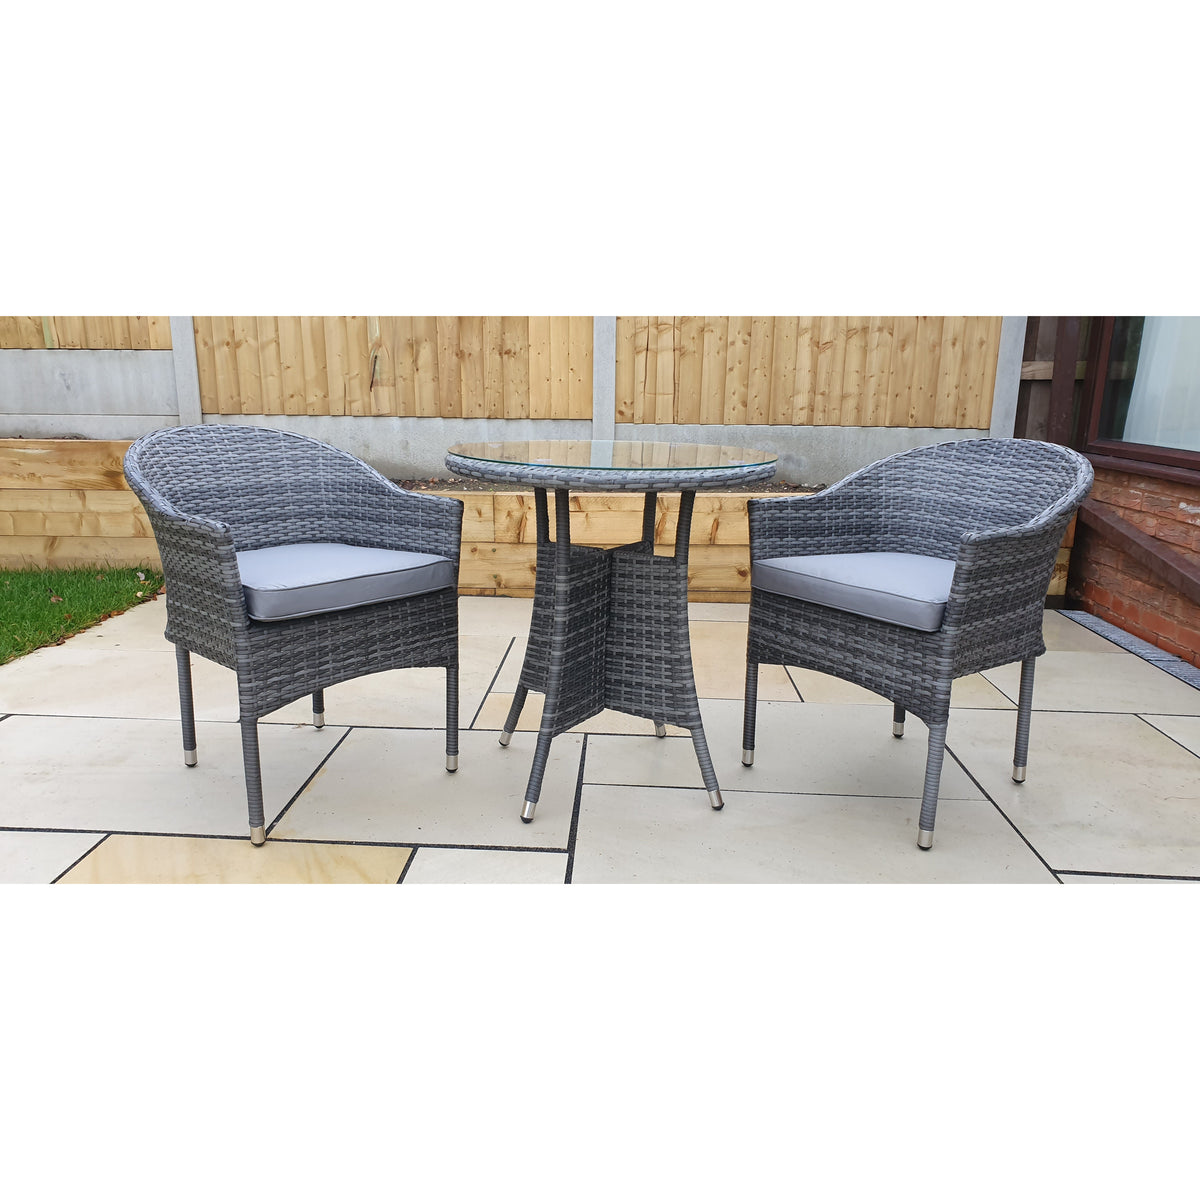 Emily 2 Seat Bistro Set with Stacking Chairs